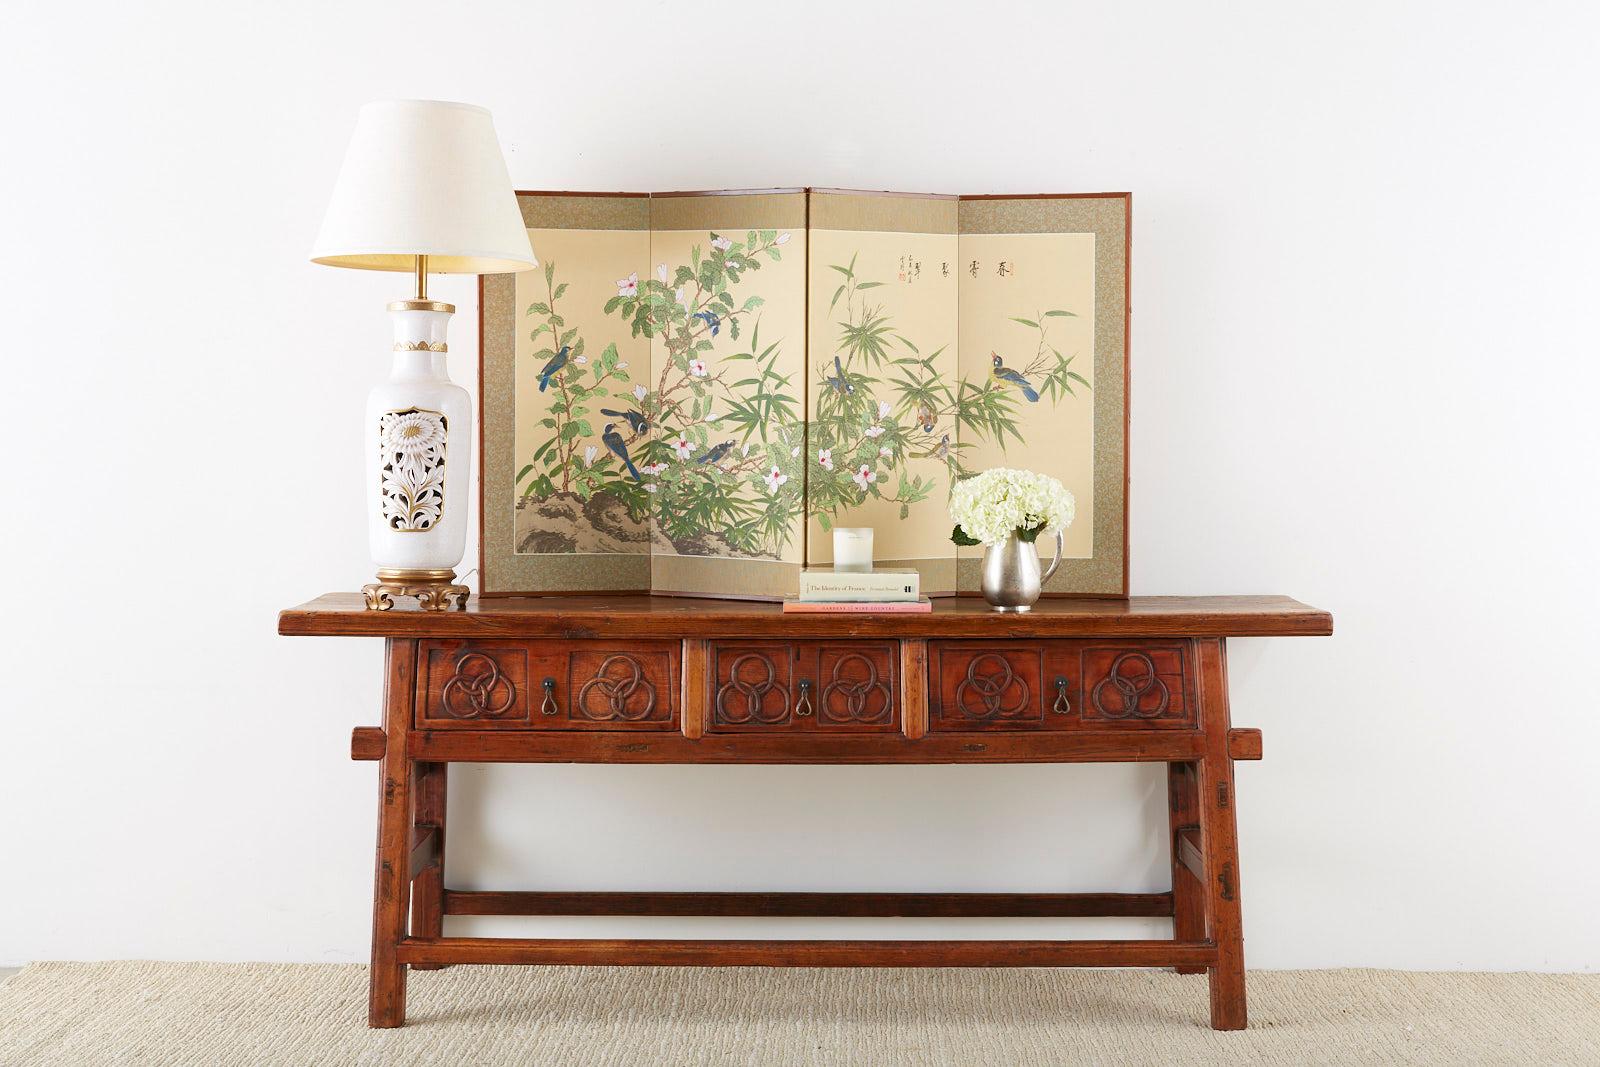 Magnificent Chinese trestle style altar table or console table constructed from hand carved elm. Featuring a thick rustic plank top over 2 inches thick. The table is fronted by three large storage drawers decorated with a three ring motif of